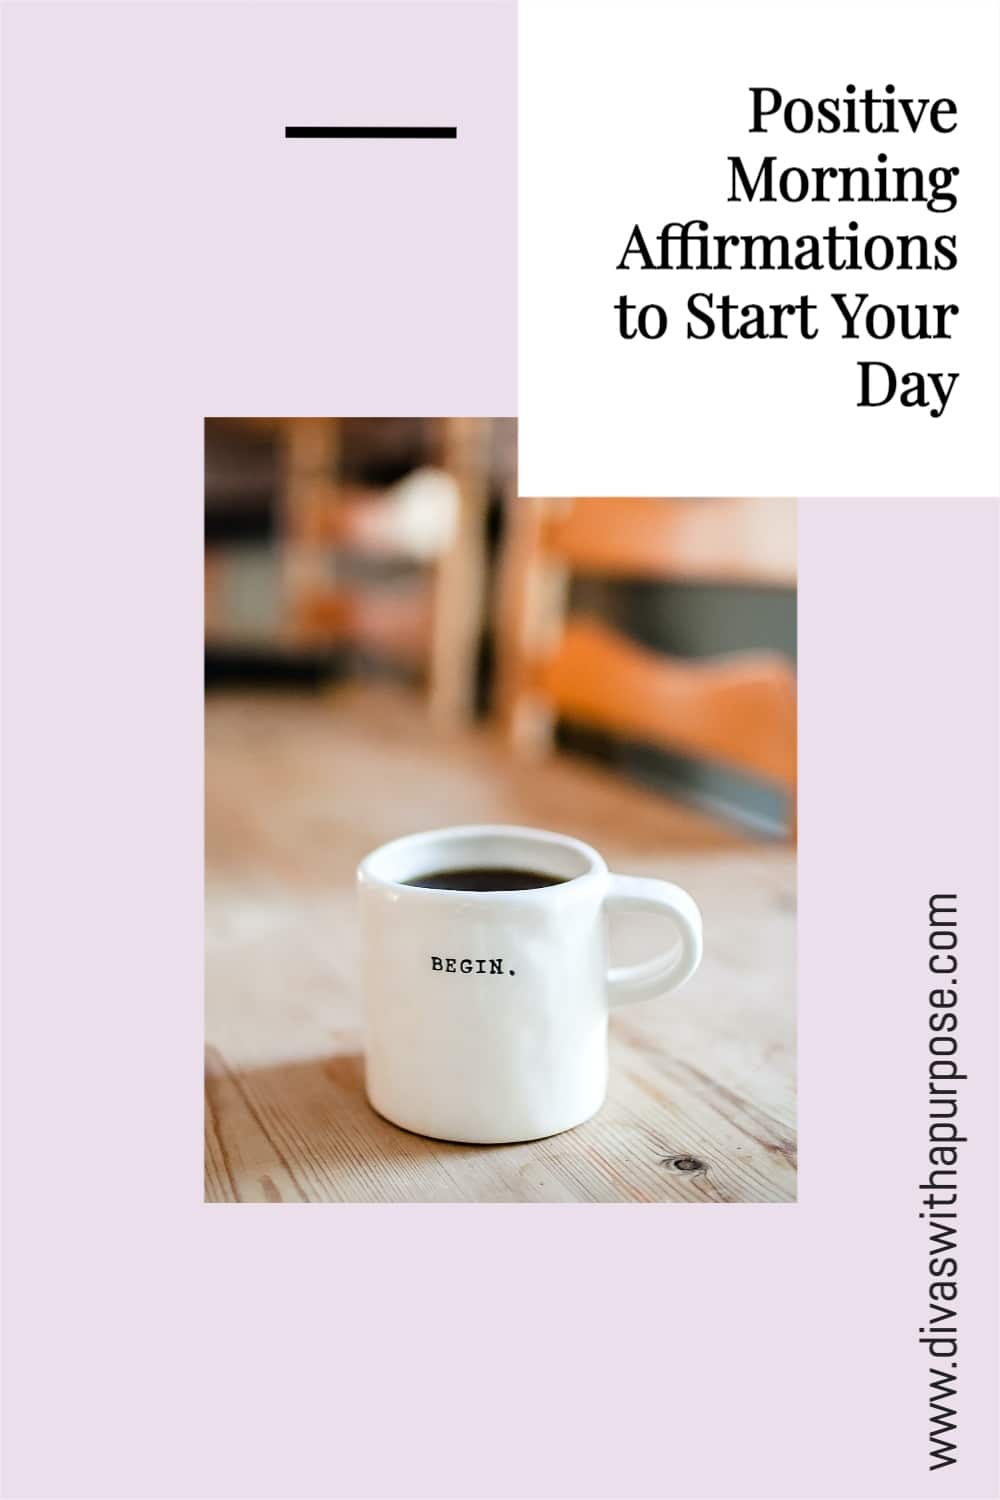 When you incorporate daily affirmations into your life they can play a big part in your success. Here are 20 positive morning affirmations to get you started.